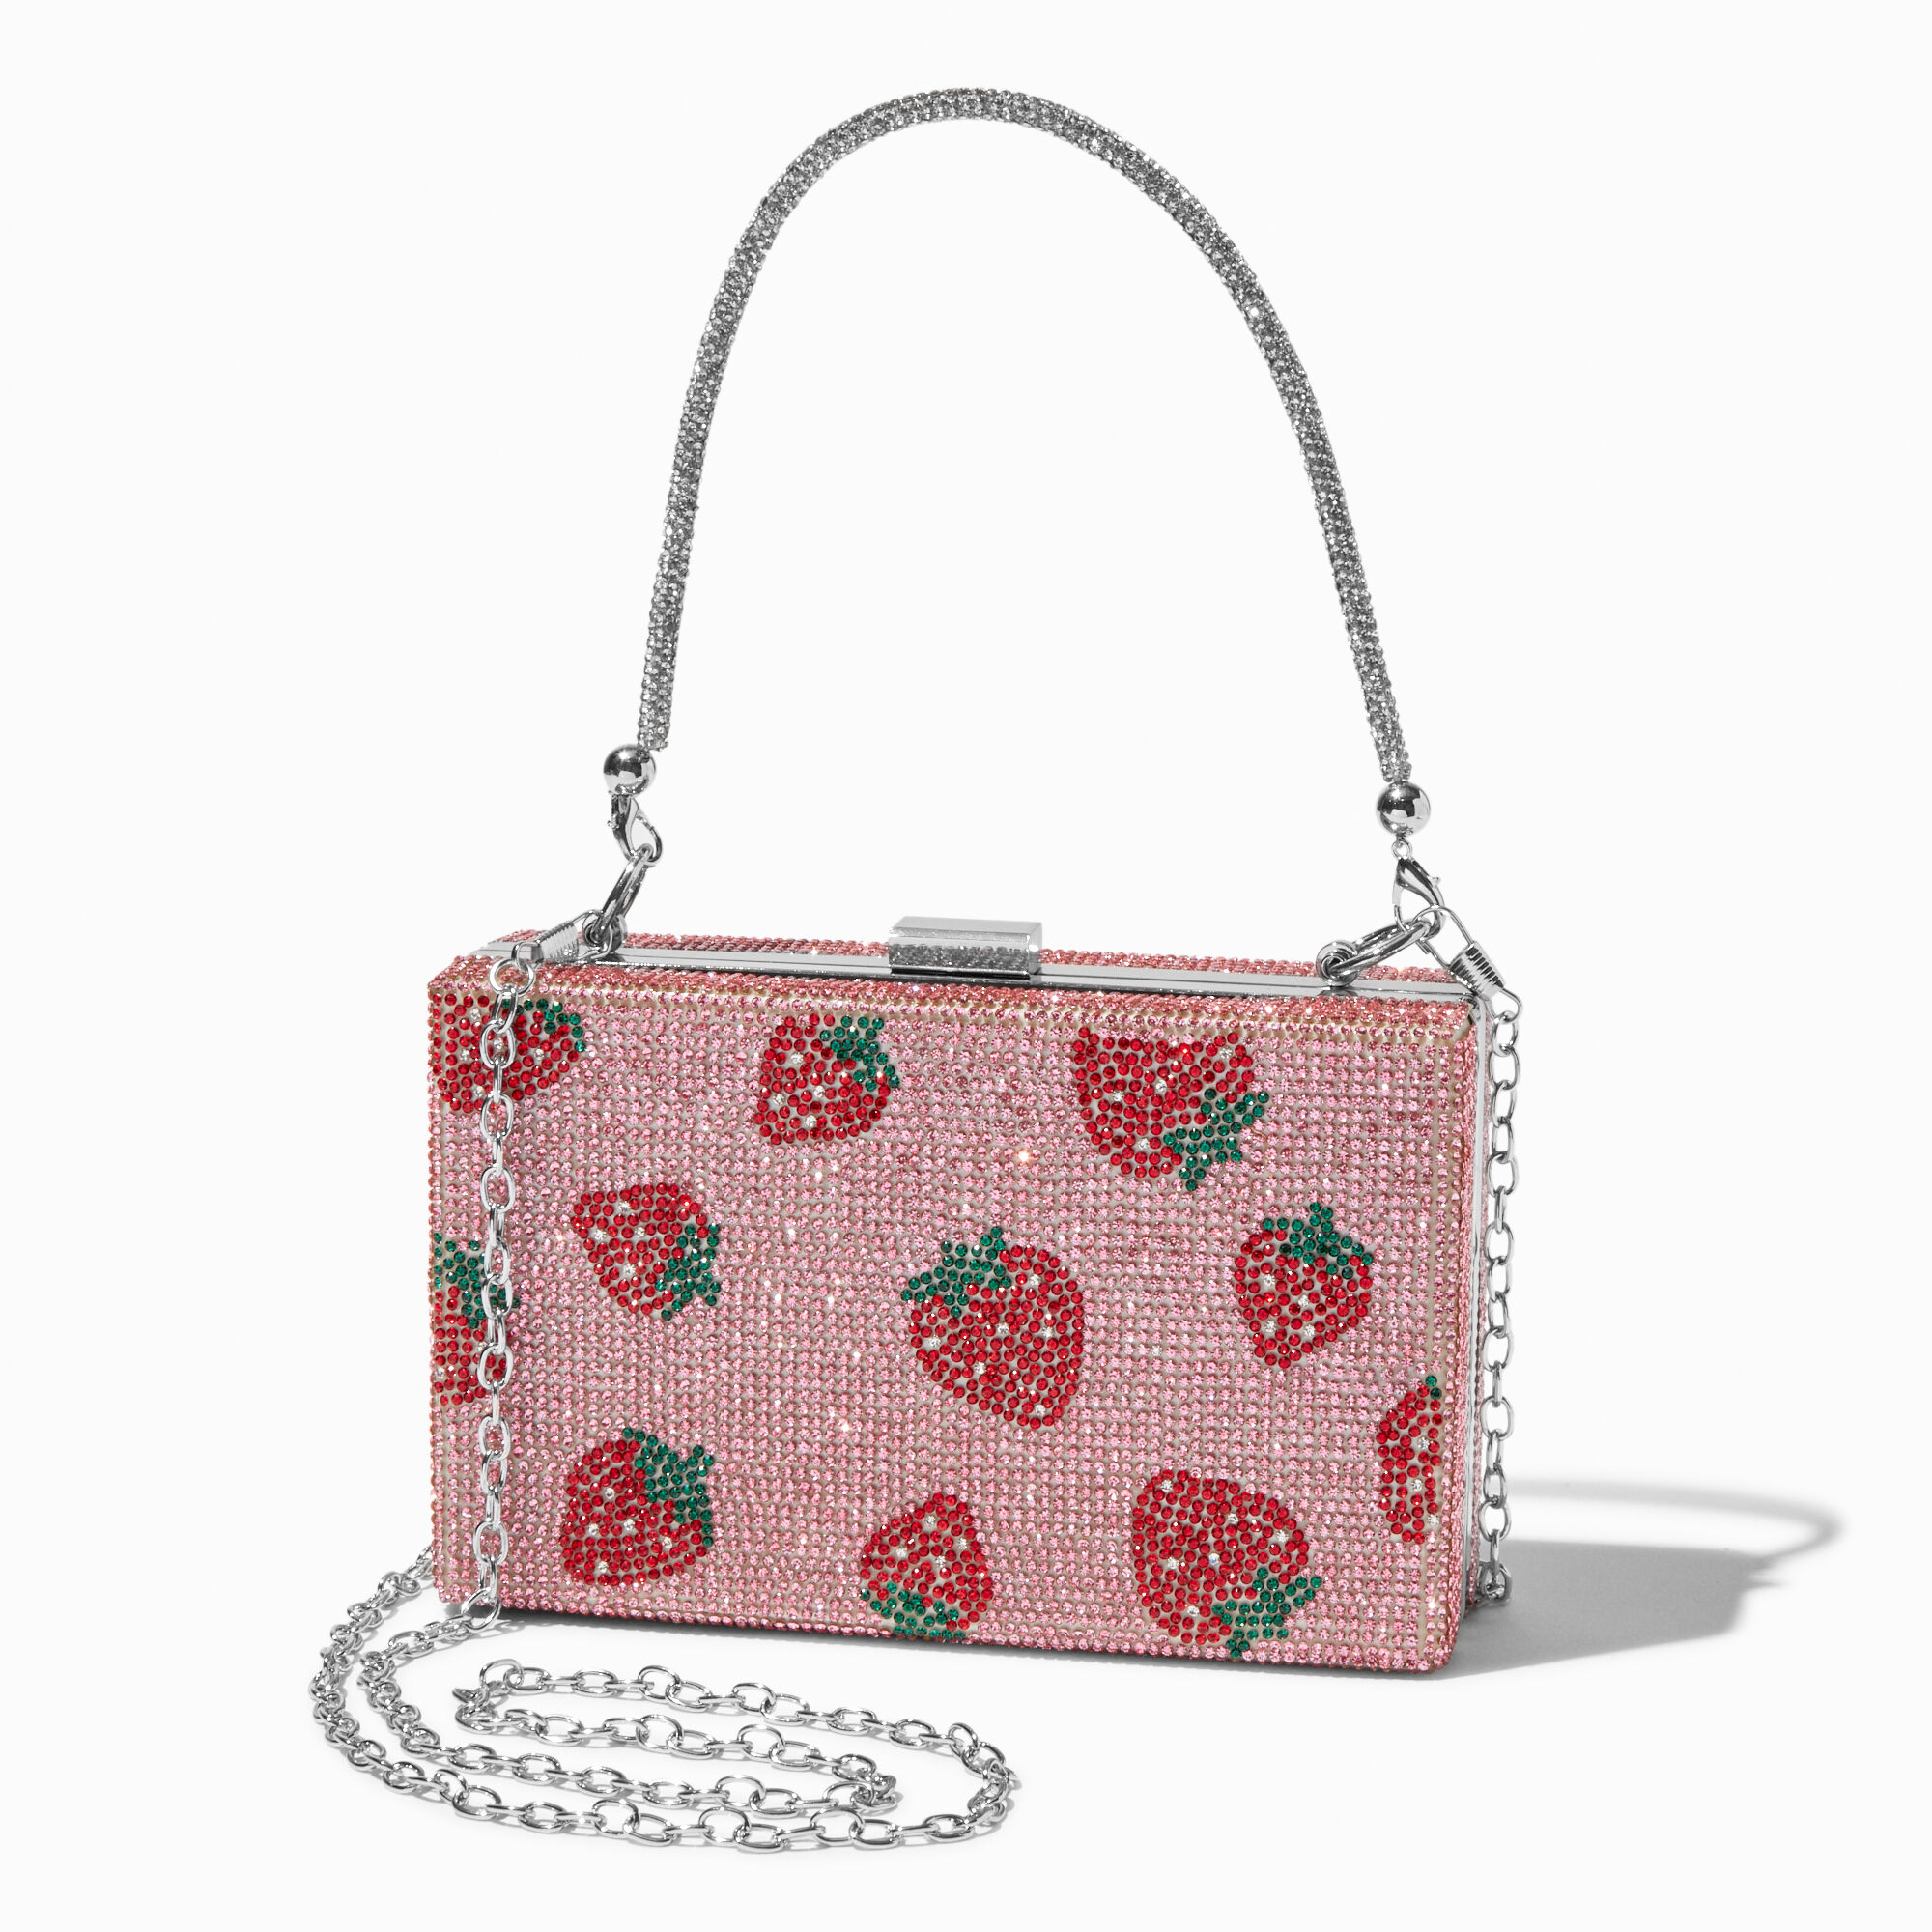 View Claires Strawberry Bling Crossbody Bag Pink information